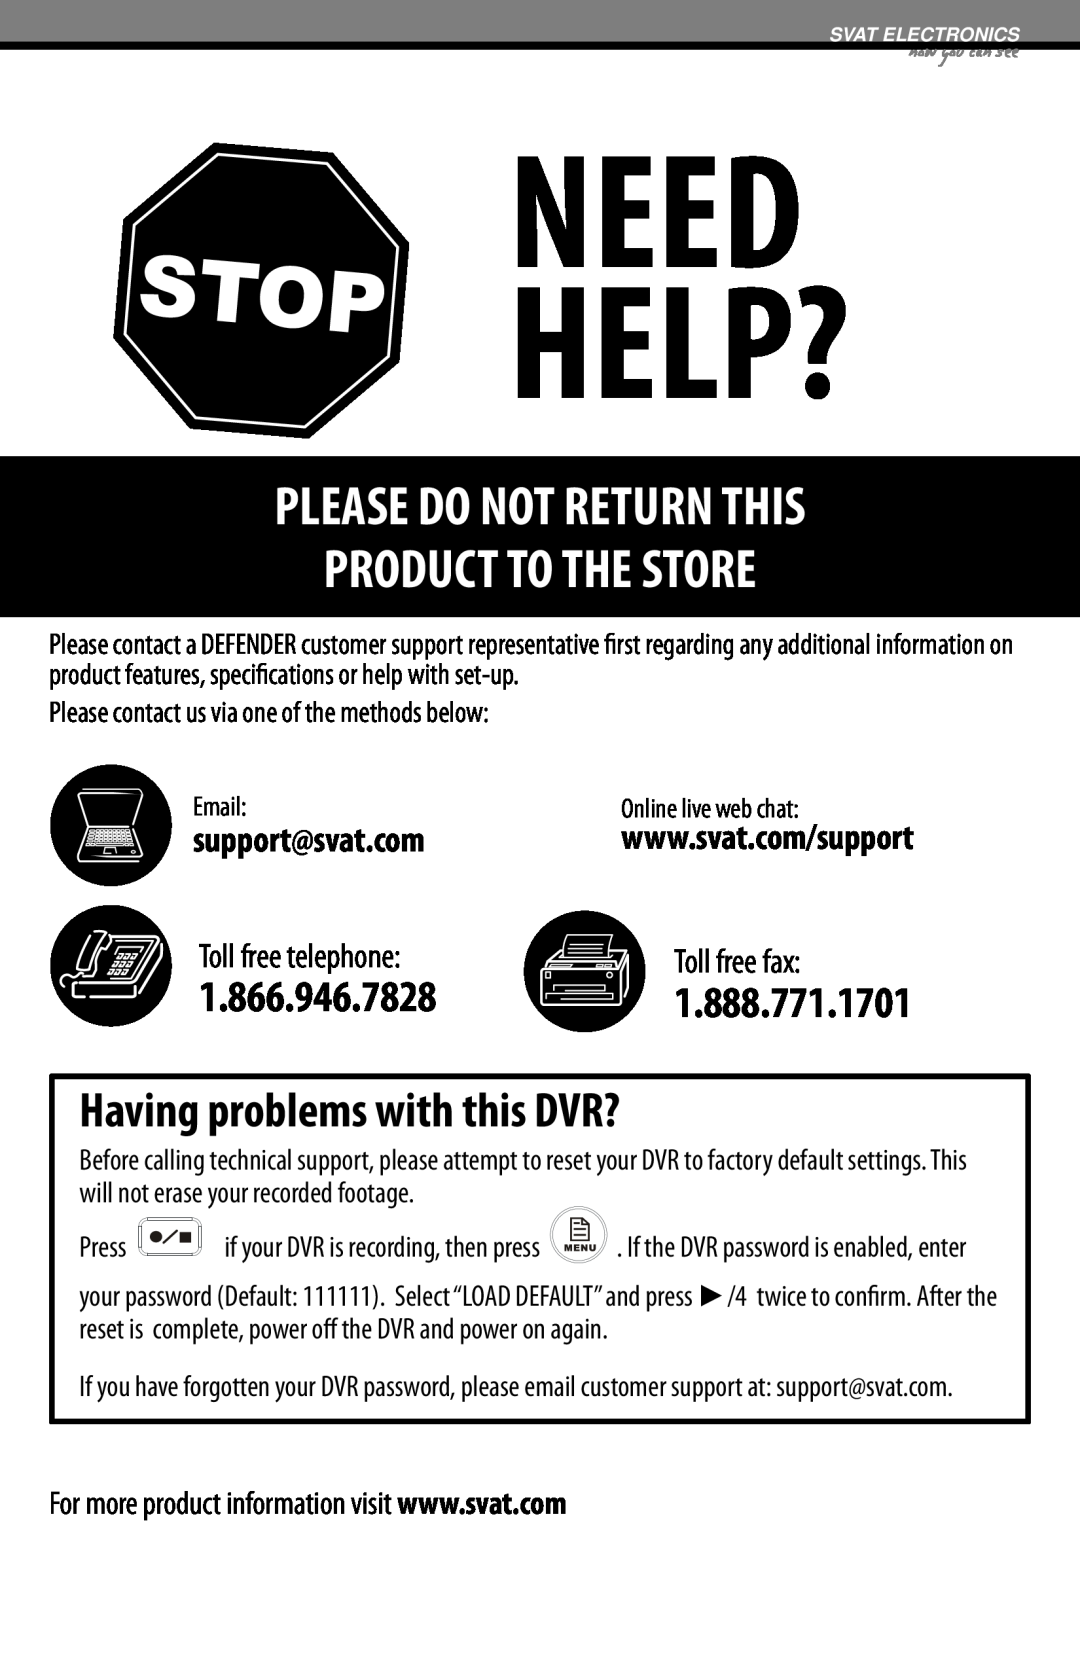 SVAT Electronics CLEARVU2 Having problems with this DVR?, Important! Please Read, 1.888.771.1701, Press, Need Help? 